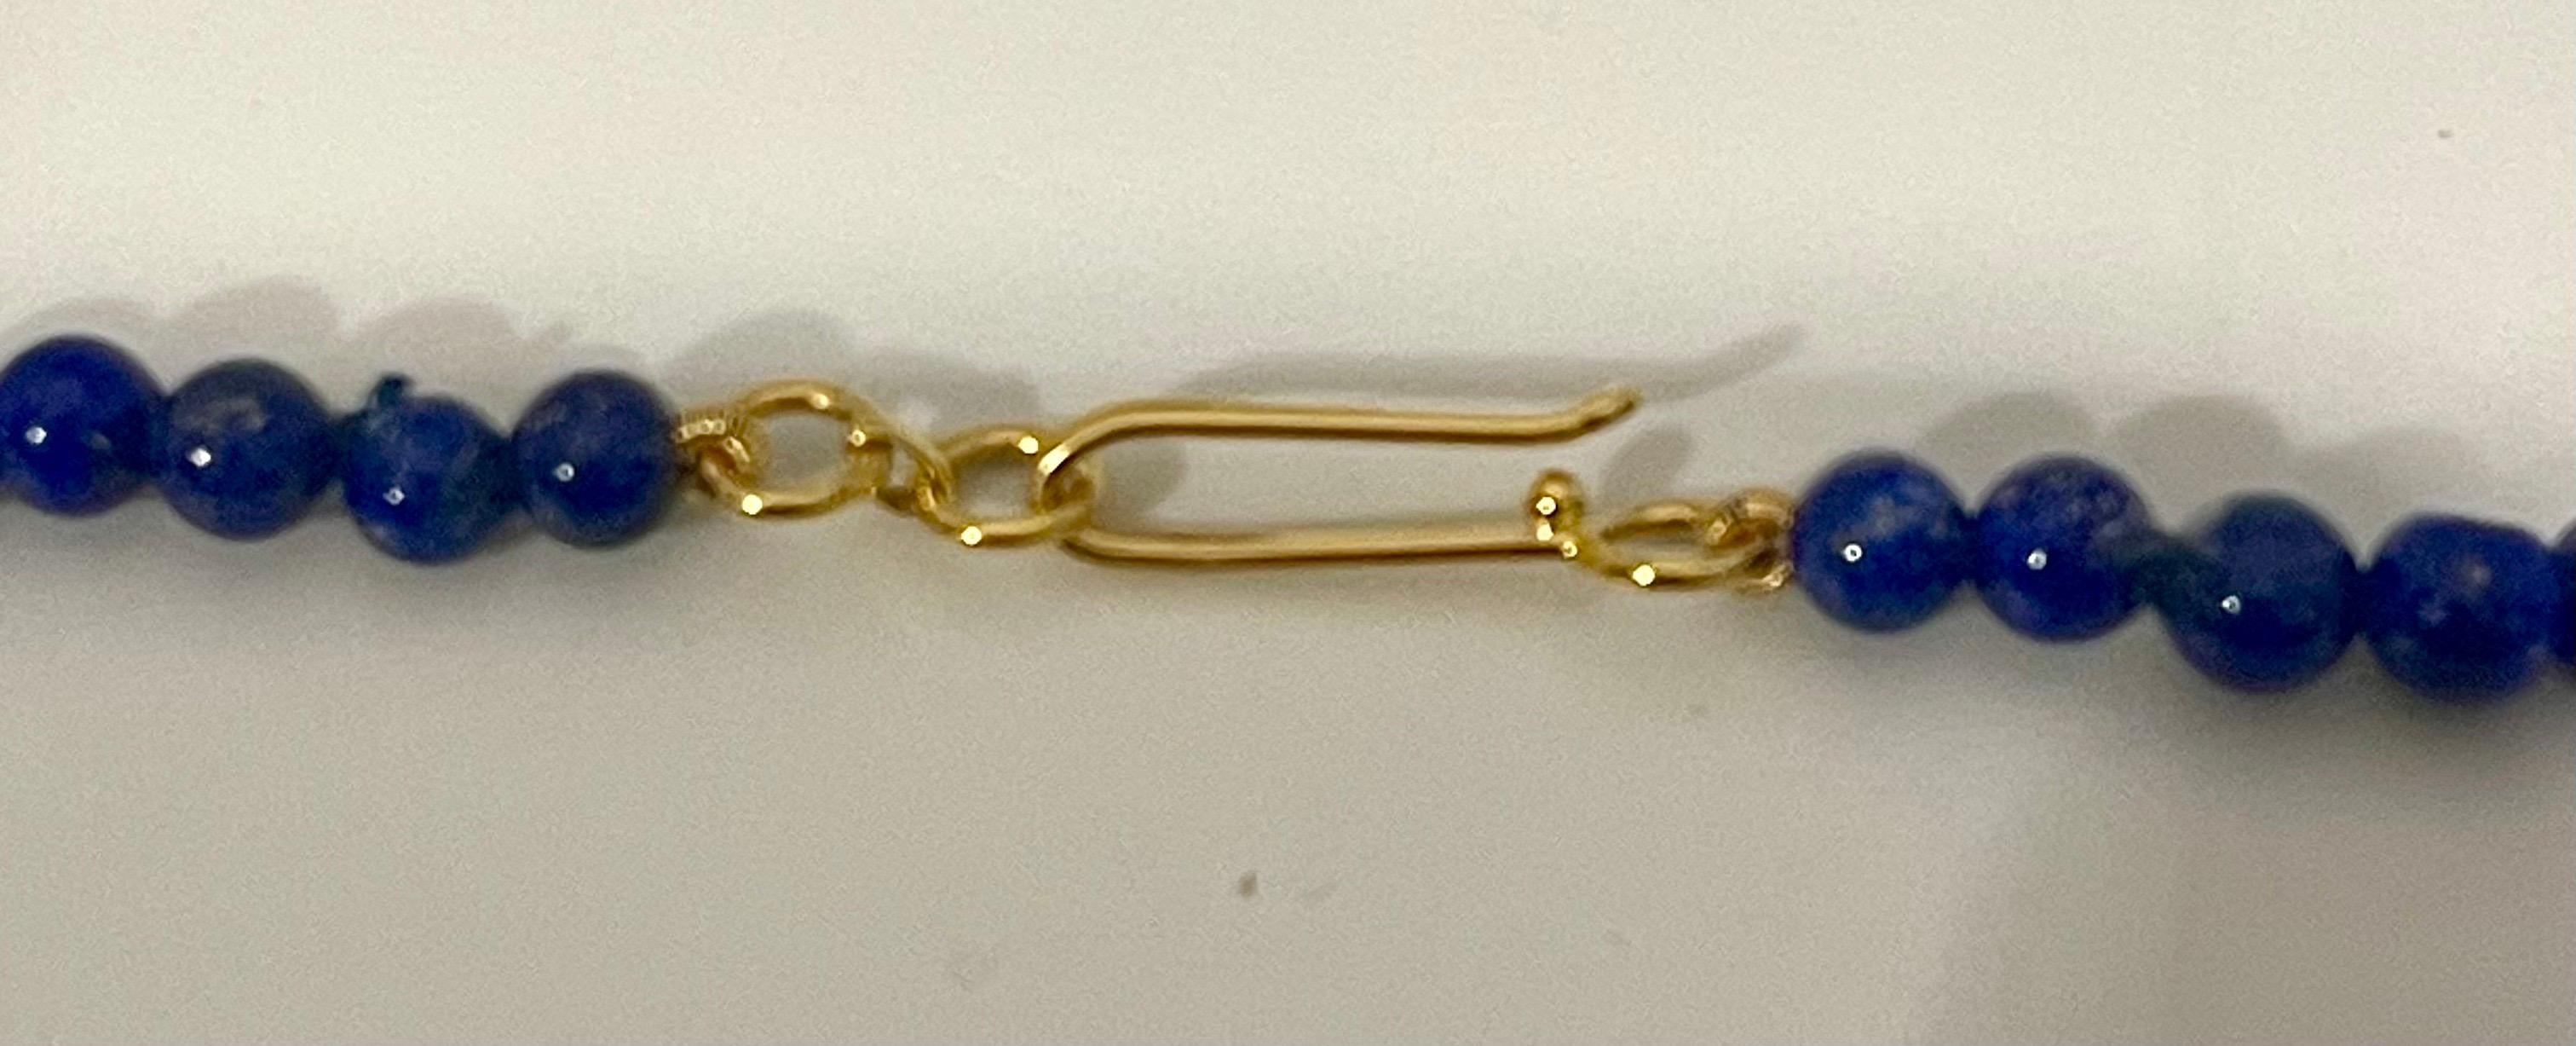 Vintage Lapis Lazuli Single Strand Necklace with 14 Karat Yellow Long Hook Clasp For Sale 4